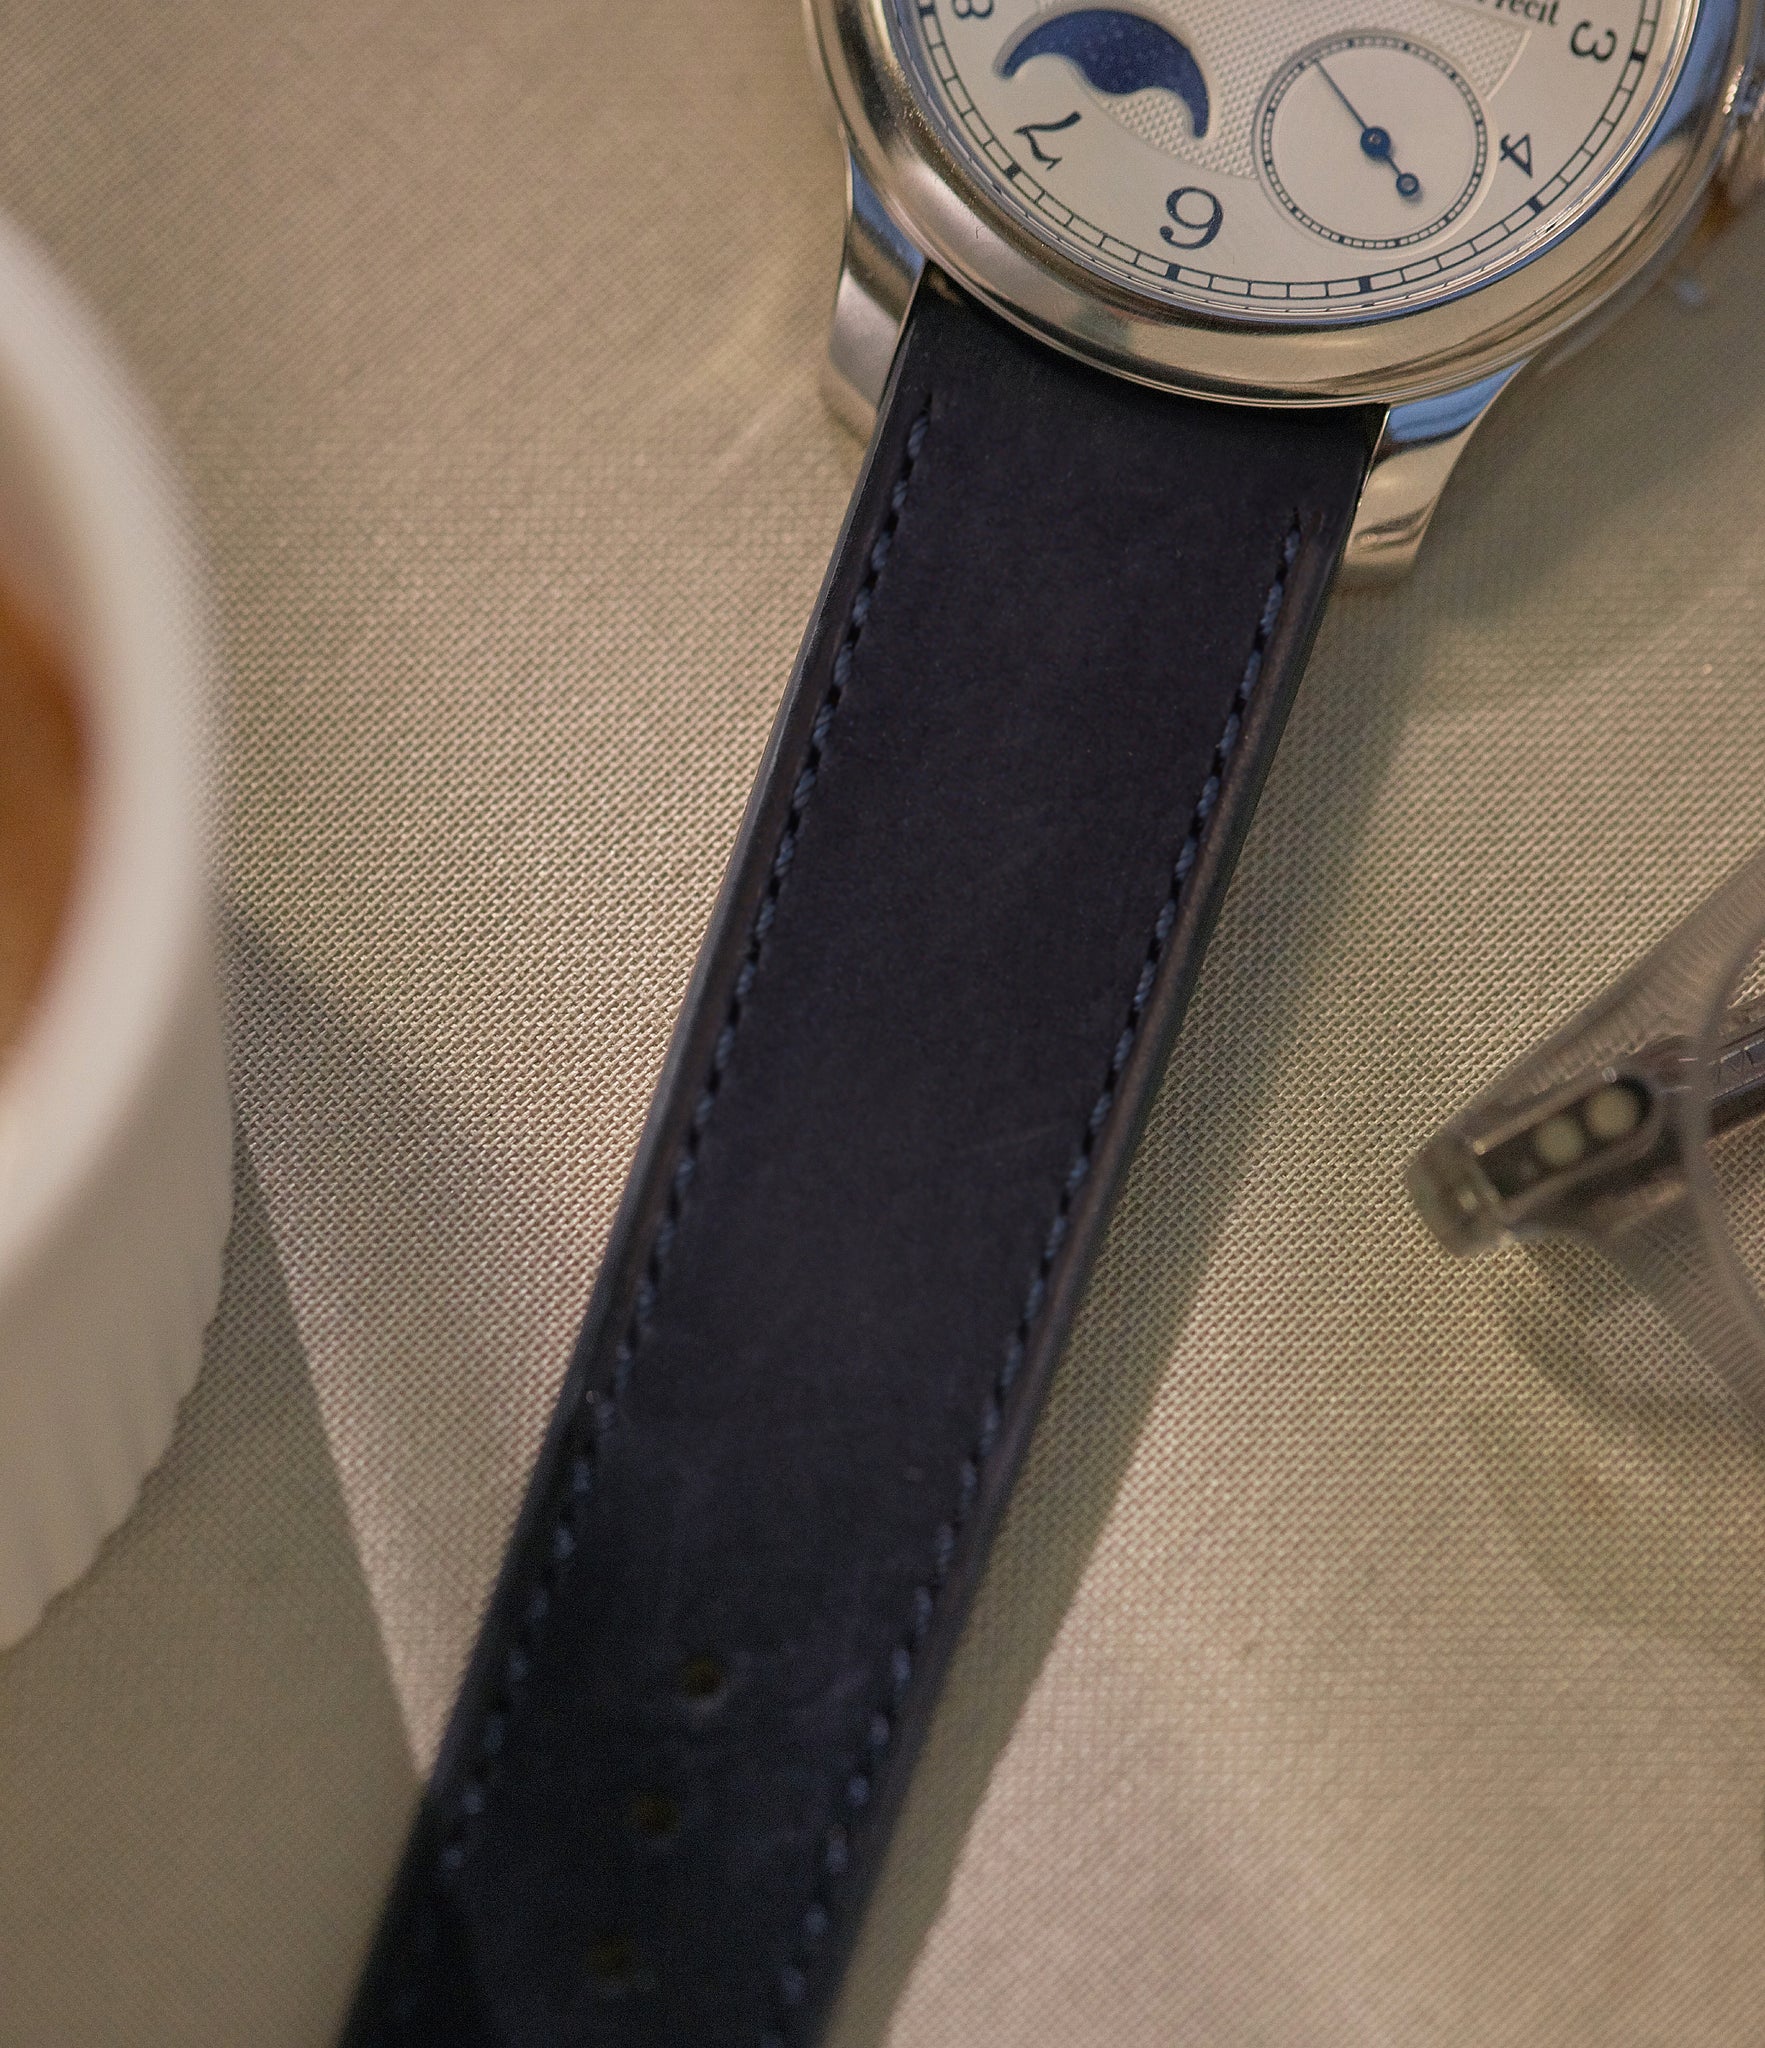 Buy nubuck quality watch strap in starry night blue from A Collected Man London, in short or regular lengths. We are proud to offer these hand-crafted watch straps, thoughtfully made in Europe, to suit your watch. Available to order online for worldwide delivery.